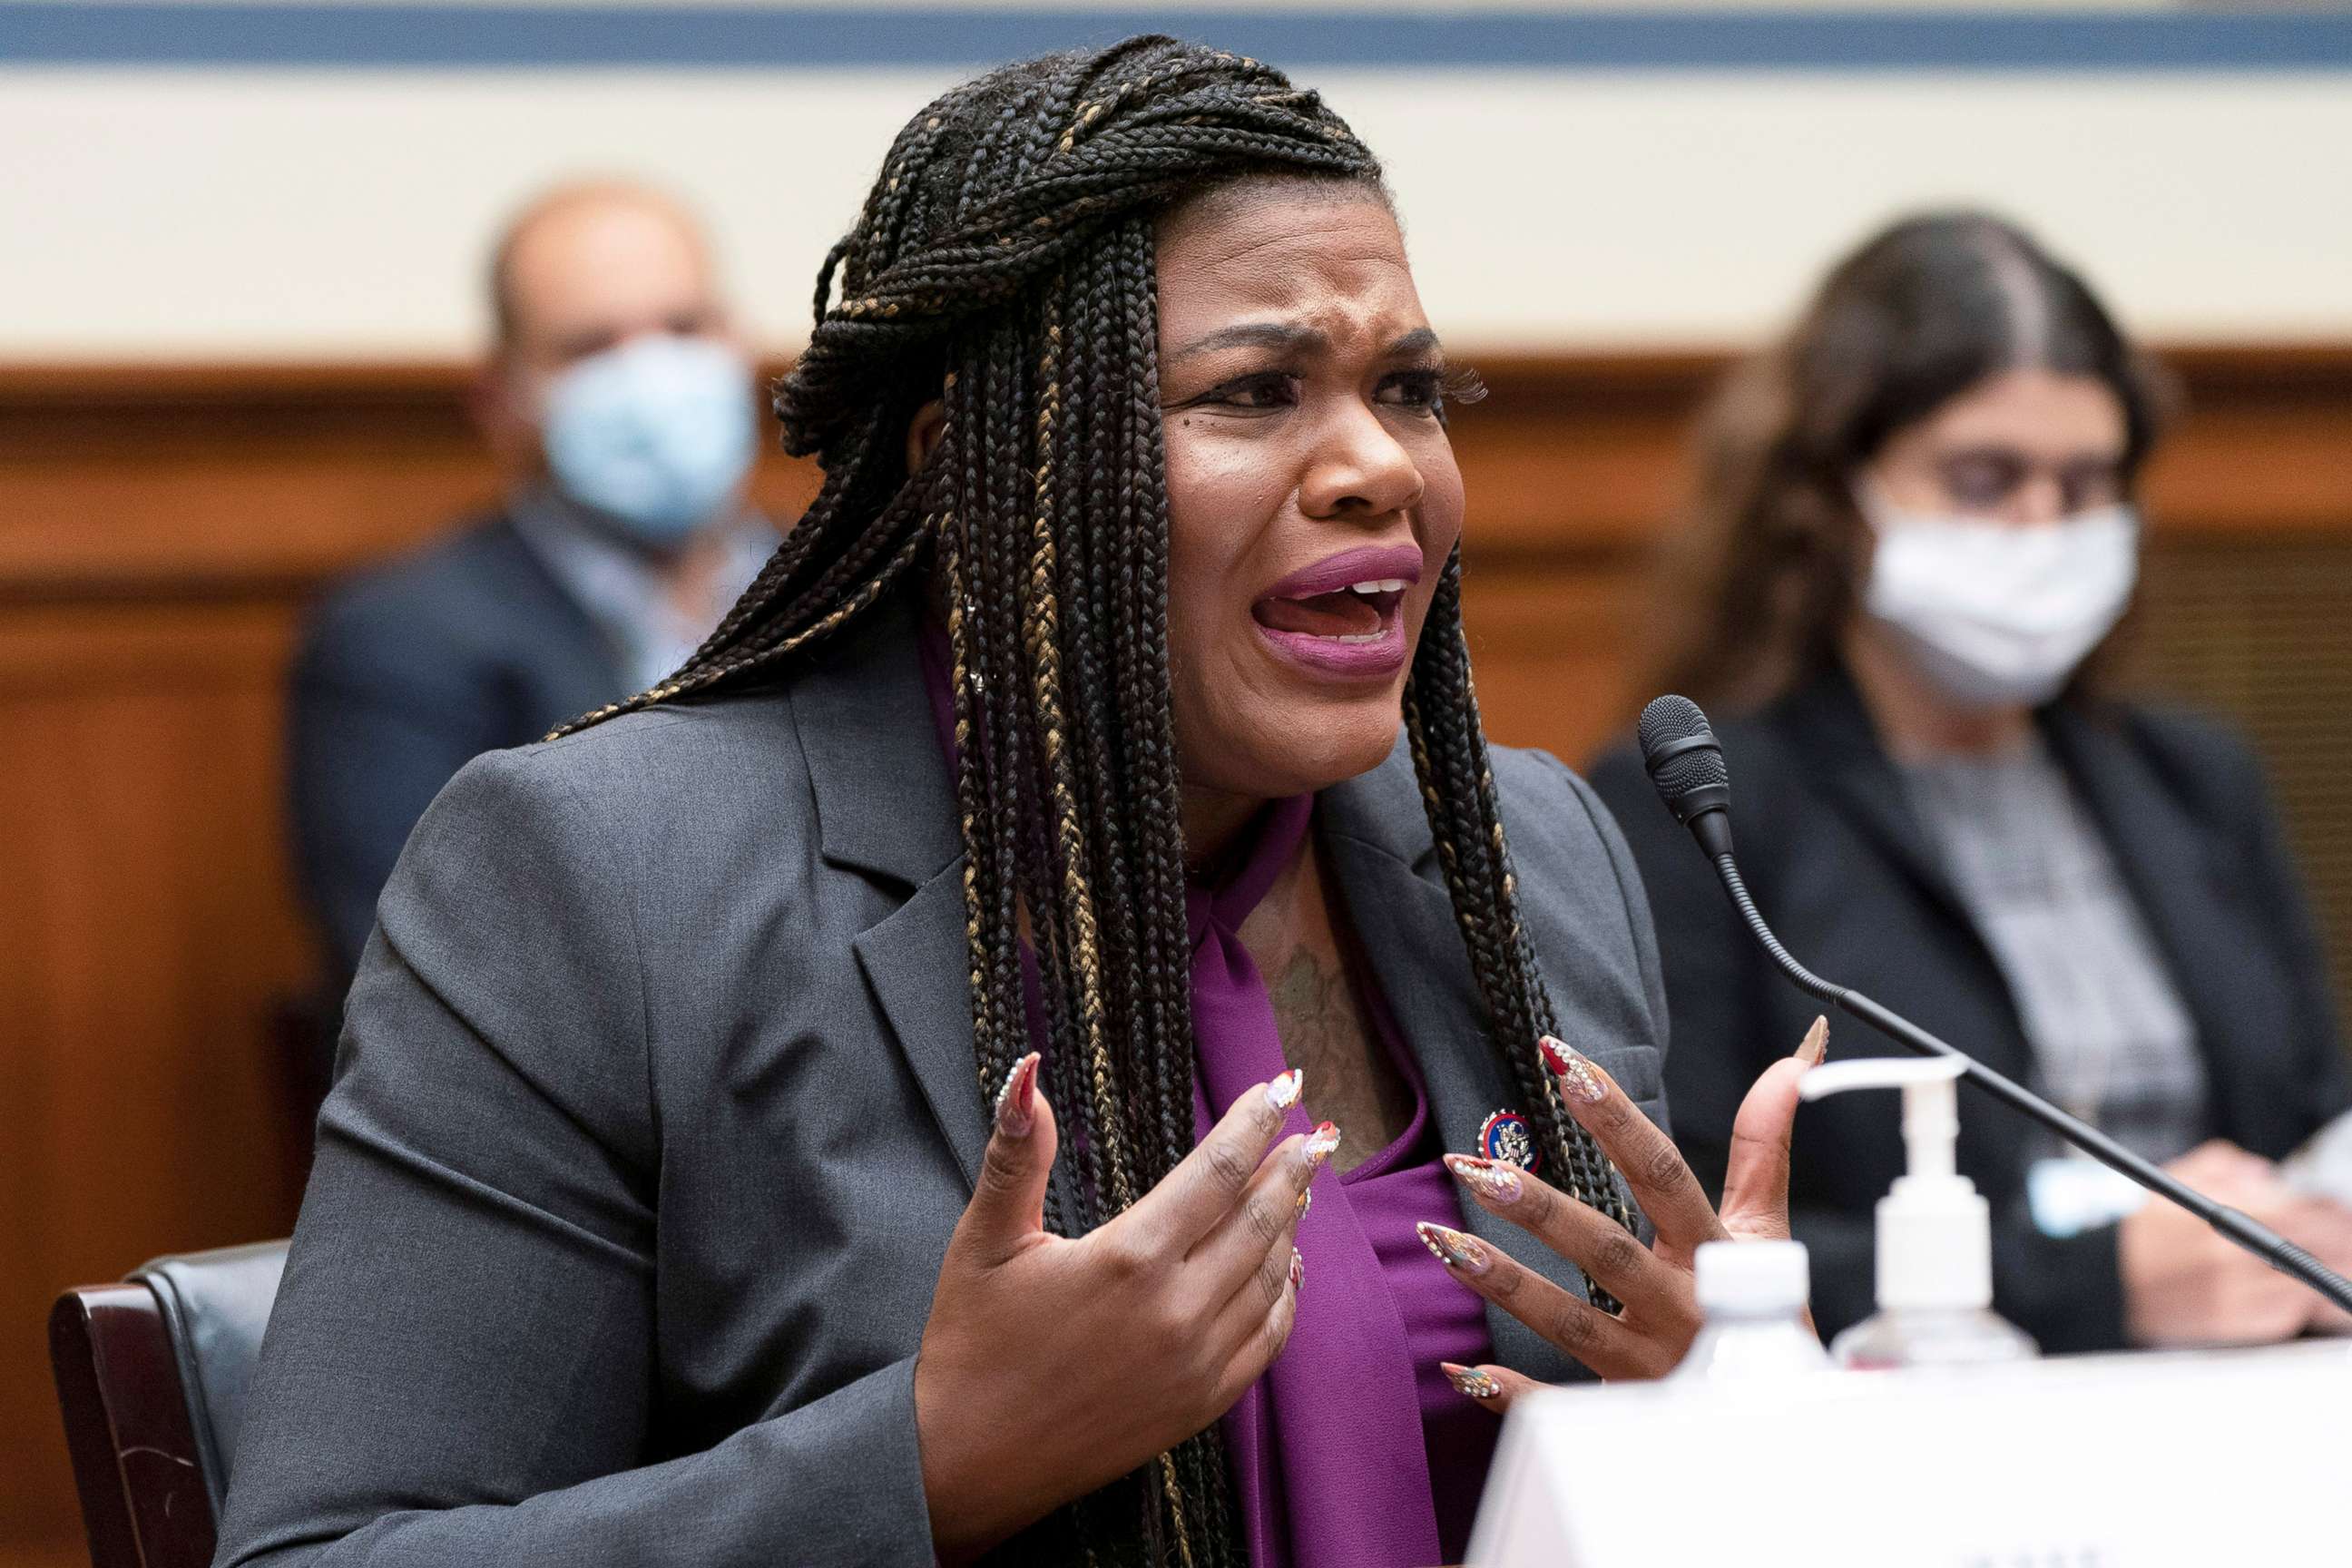 PHOTO: Rep. Cori Bush testifies about her decision to have an abortion after being raped, Sept. 30, 2021, during a House Committee on Oversight and Reform hearing on Capitol Hill in Washington, D.C.